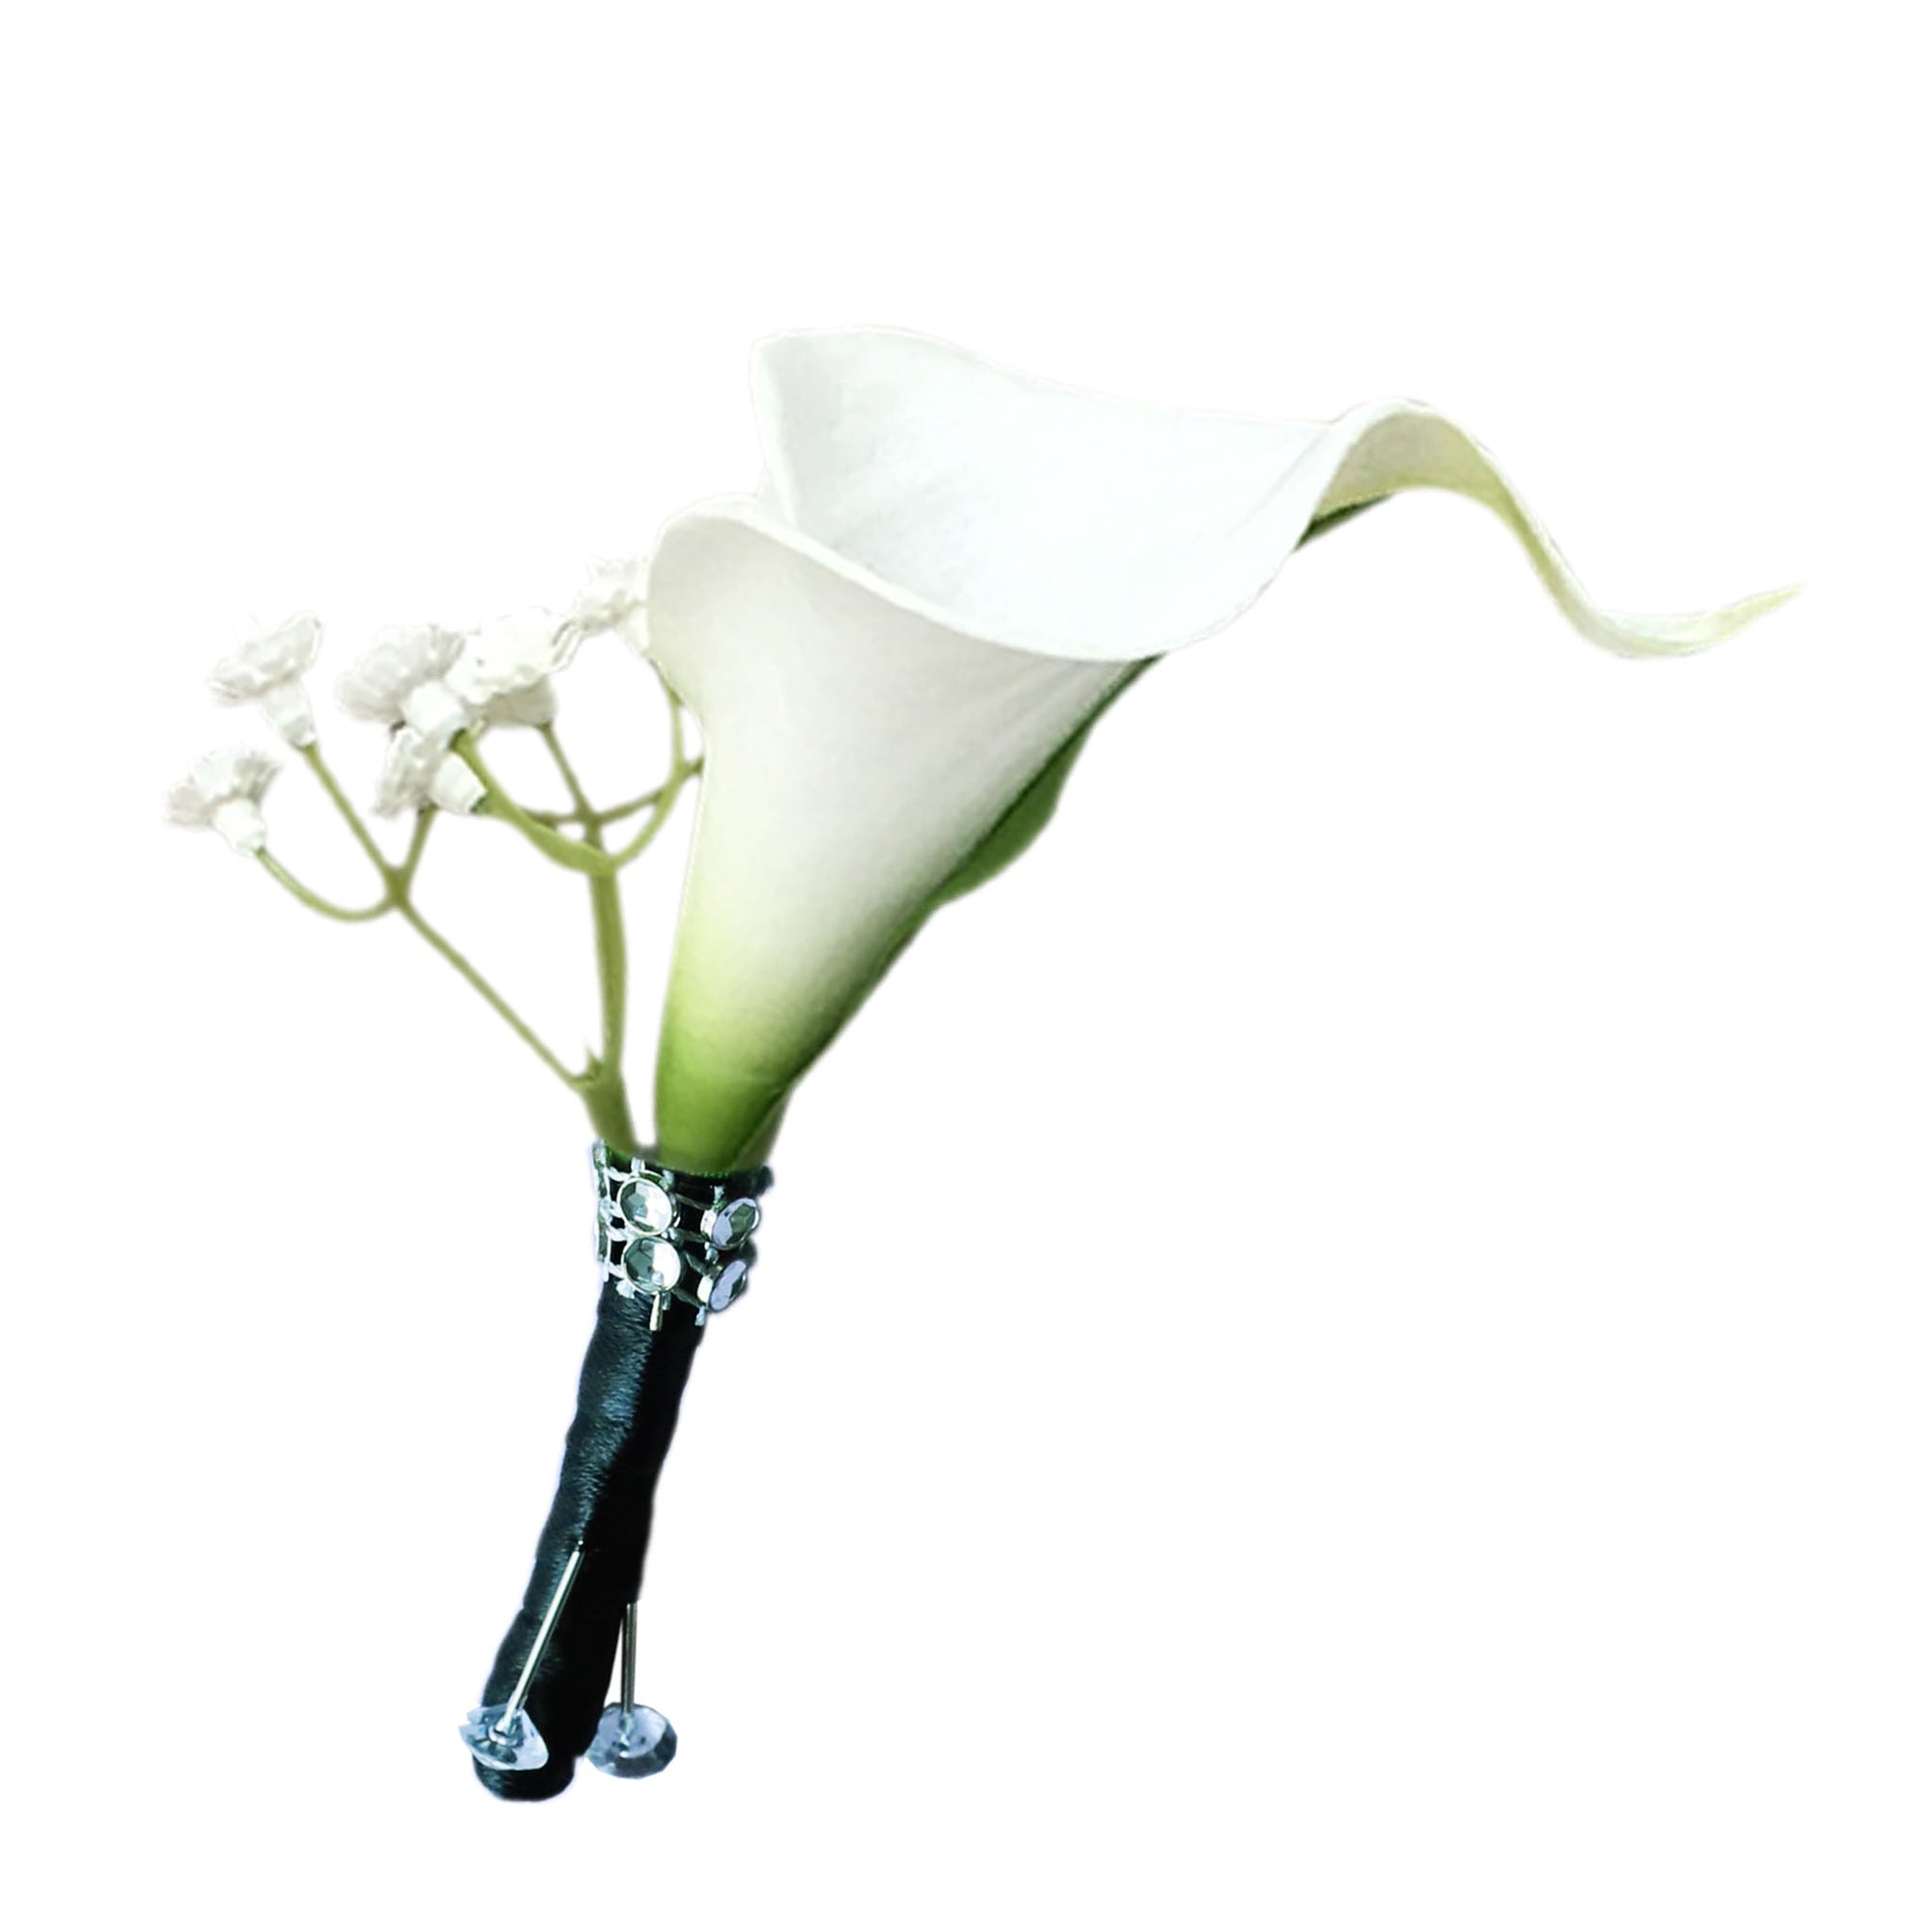 White Calla Lily Boutonniere for Groom Bestmen